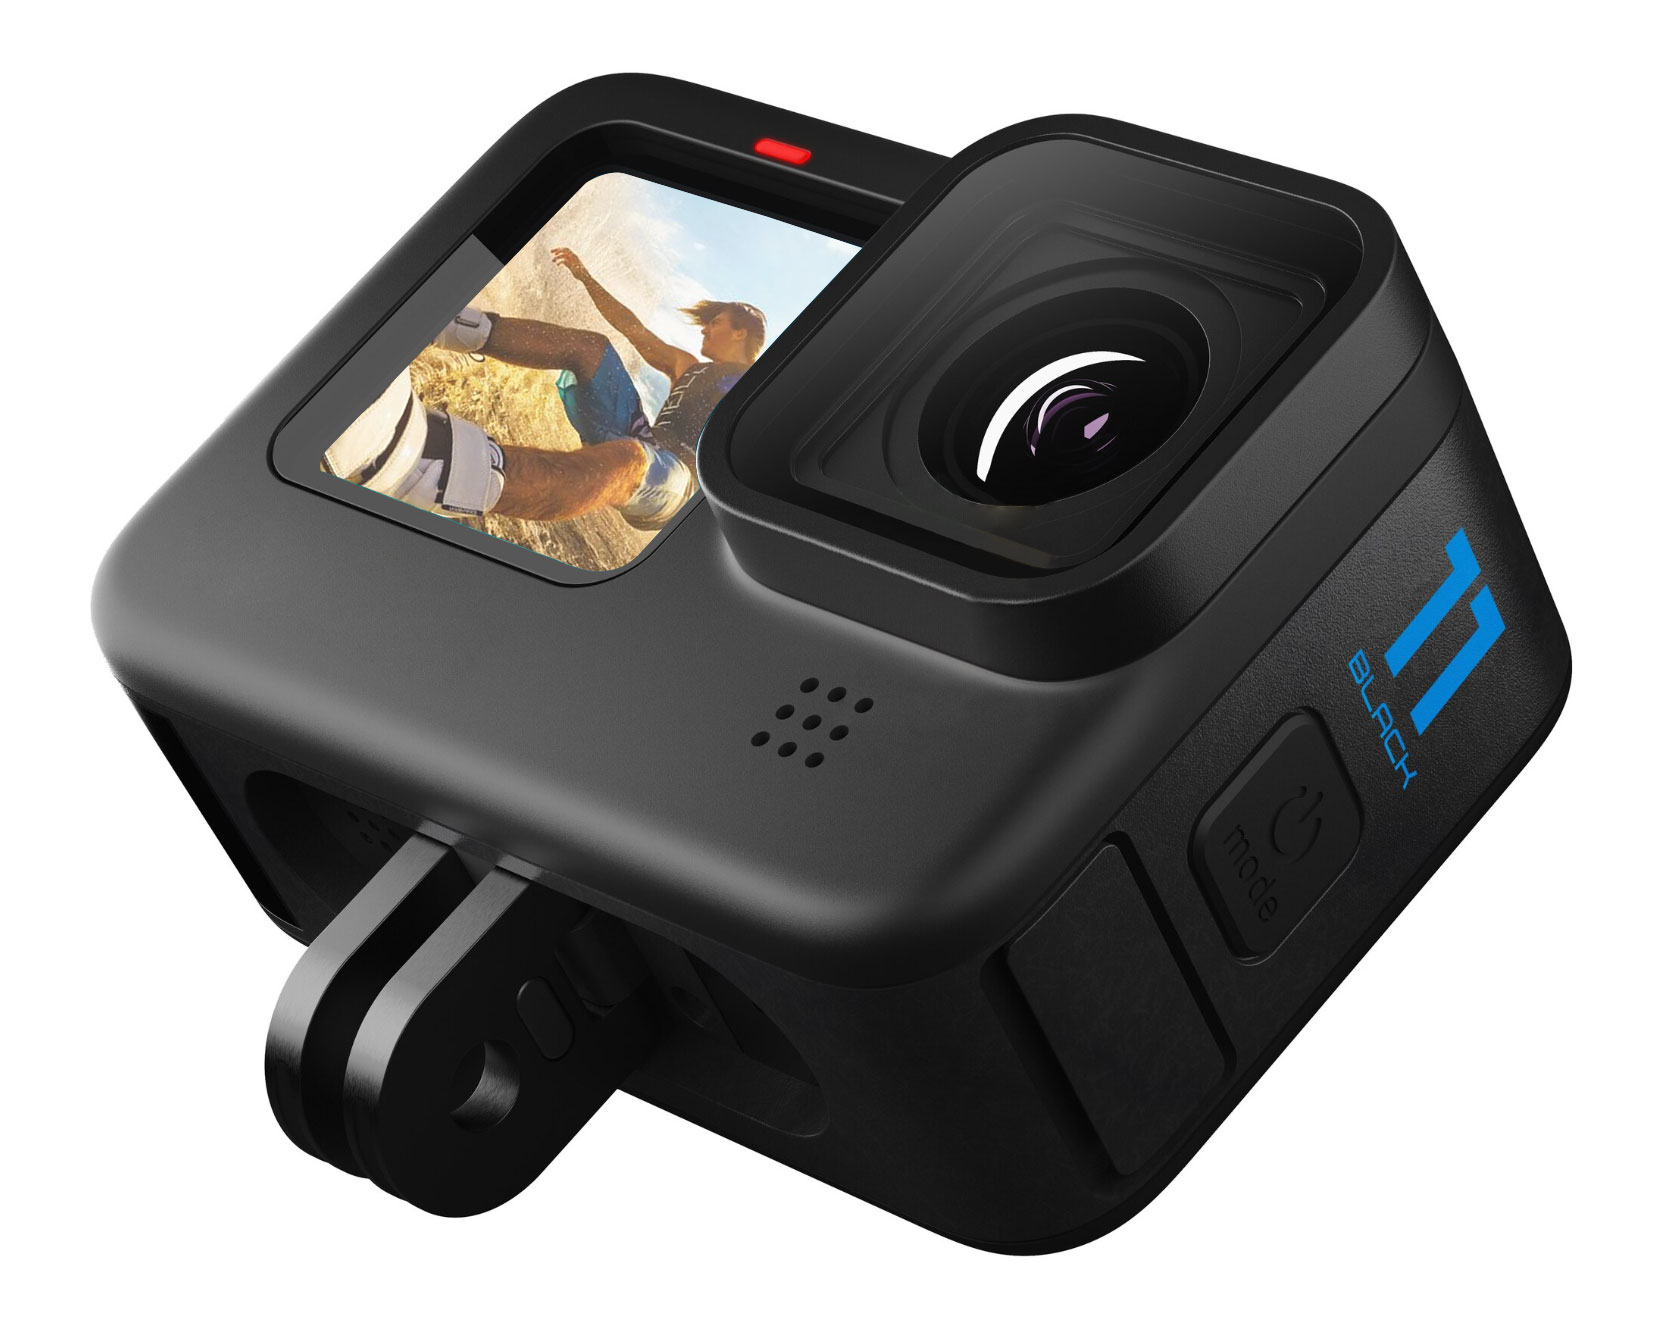 GoPro HERO11 Black (New) - 27MP Waterproof Camera with 5.3K Video + 64GB Card and DigiNerds 50-piece Action Kit - image 2 of 9